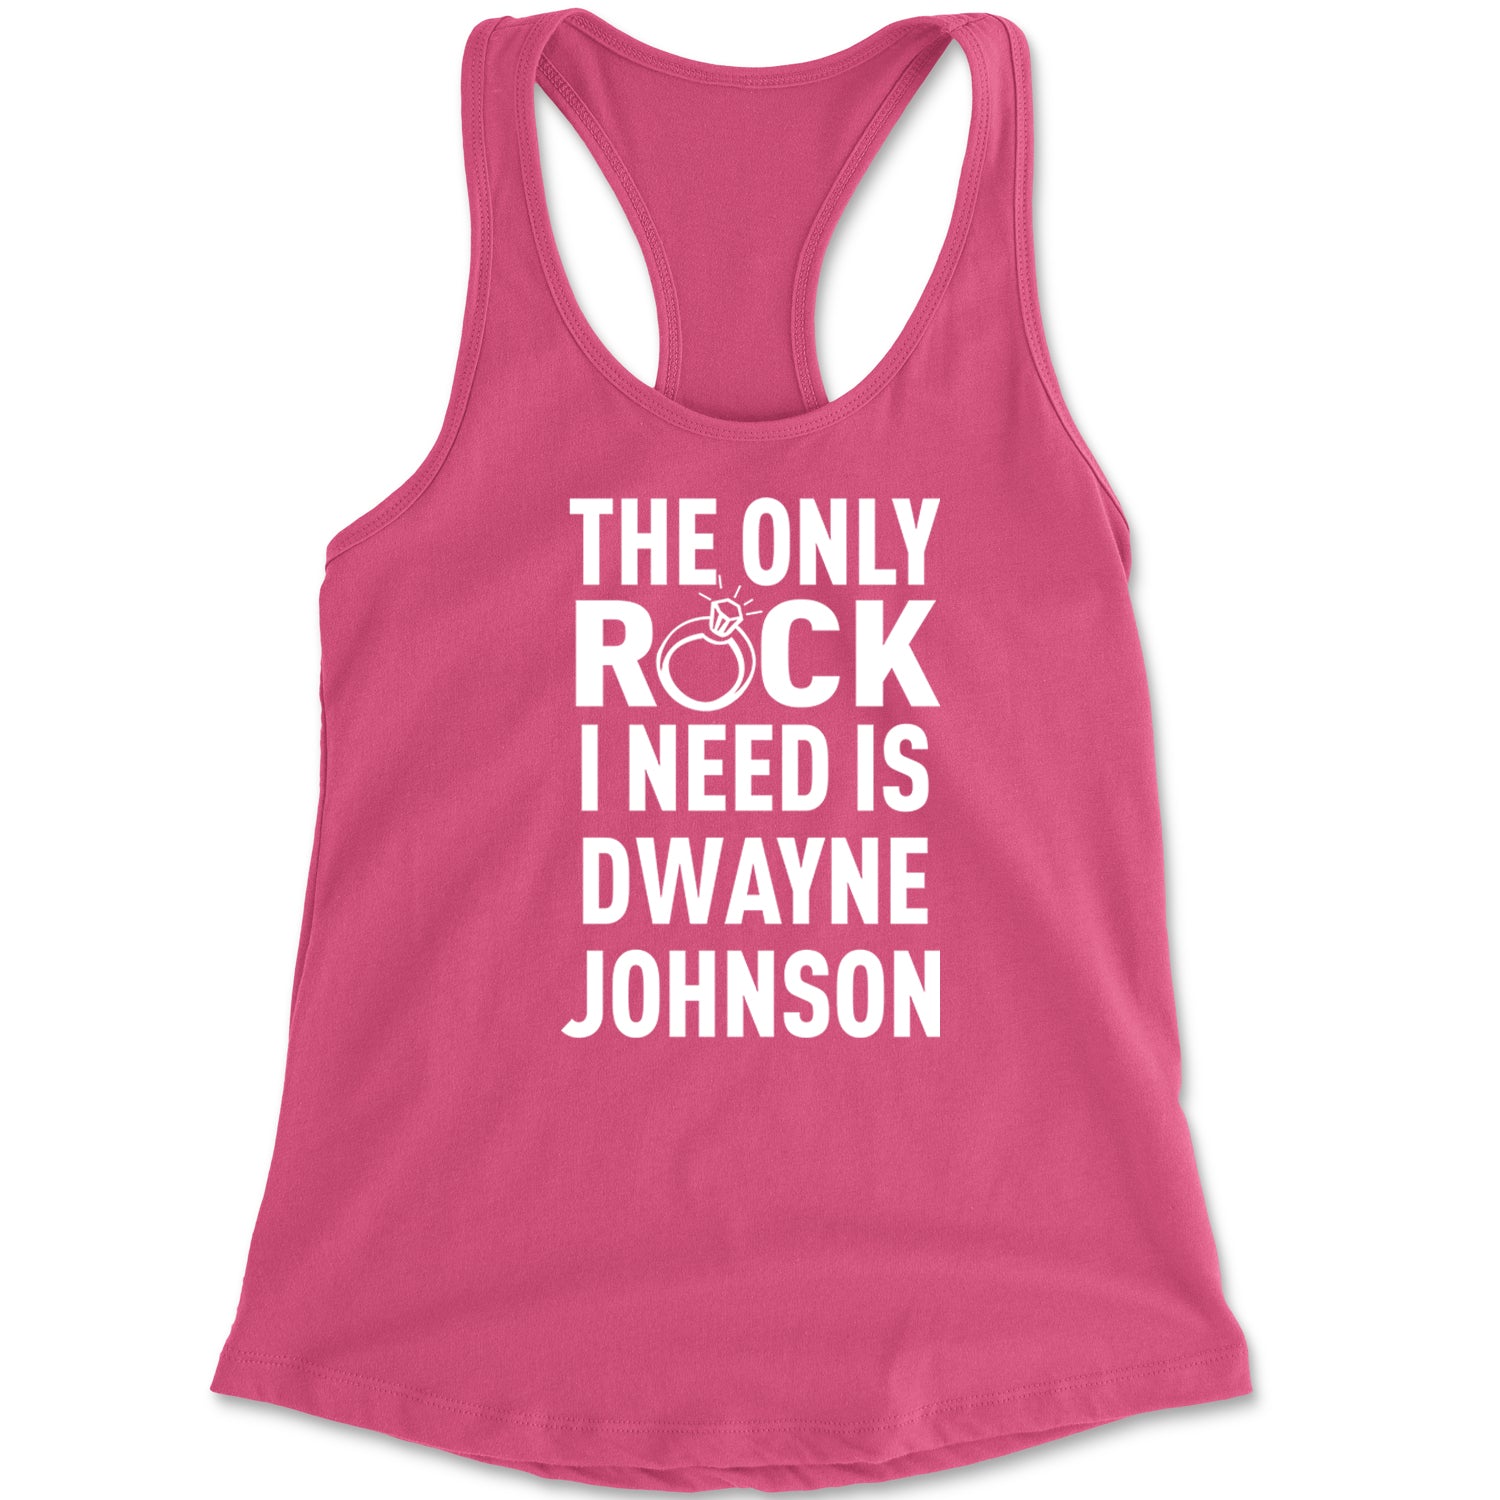 The Only Rock I Need Is Dwayne Johnson Racerback Tank Top for Women dwayne, johnson, marry, me, ring, rock, the, wedding by Expression Tees